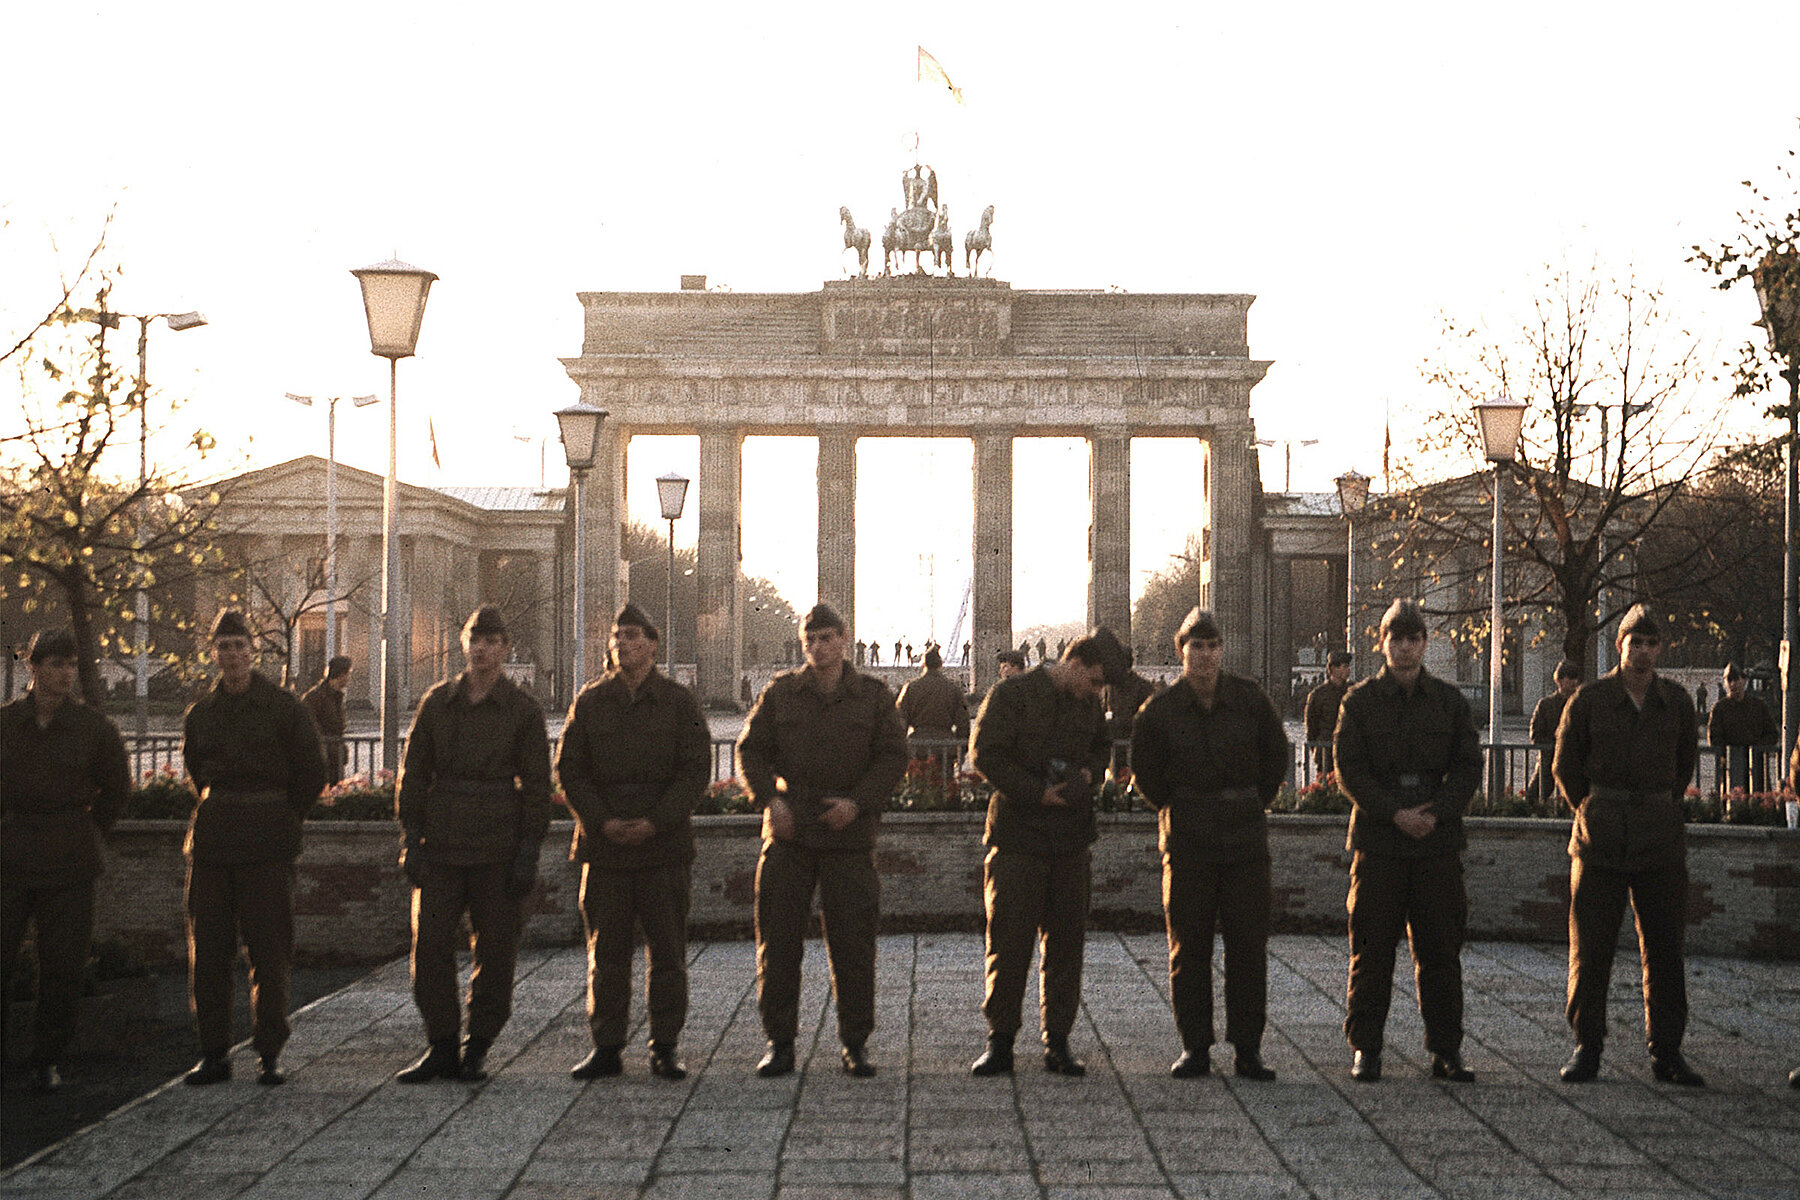 Border soldiers lined up next to each other, blocking the Brandenburg Gate. 